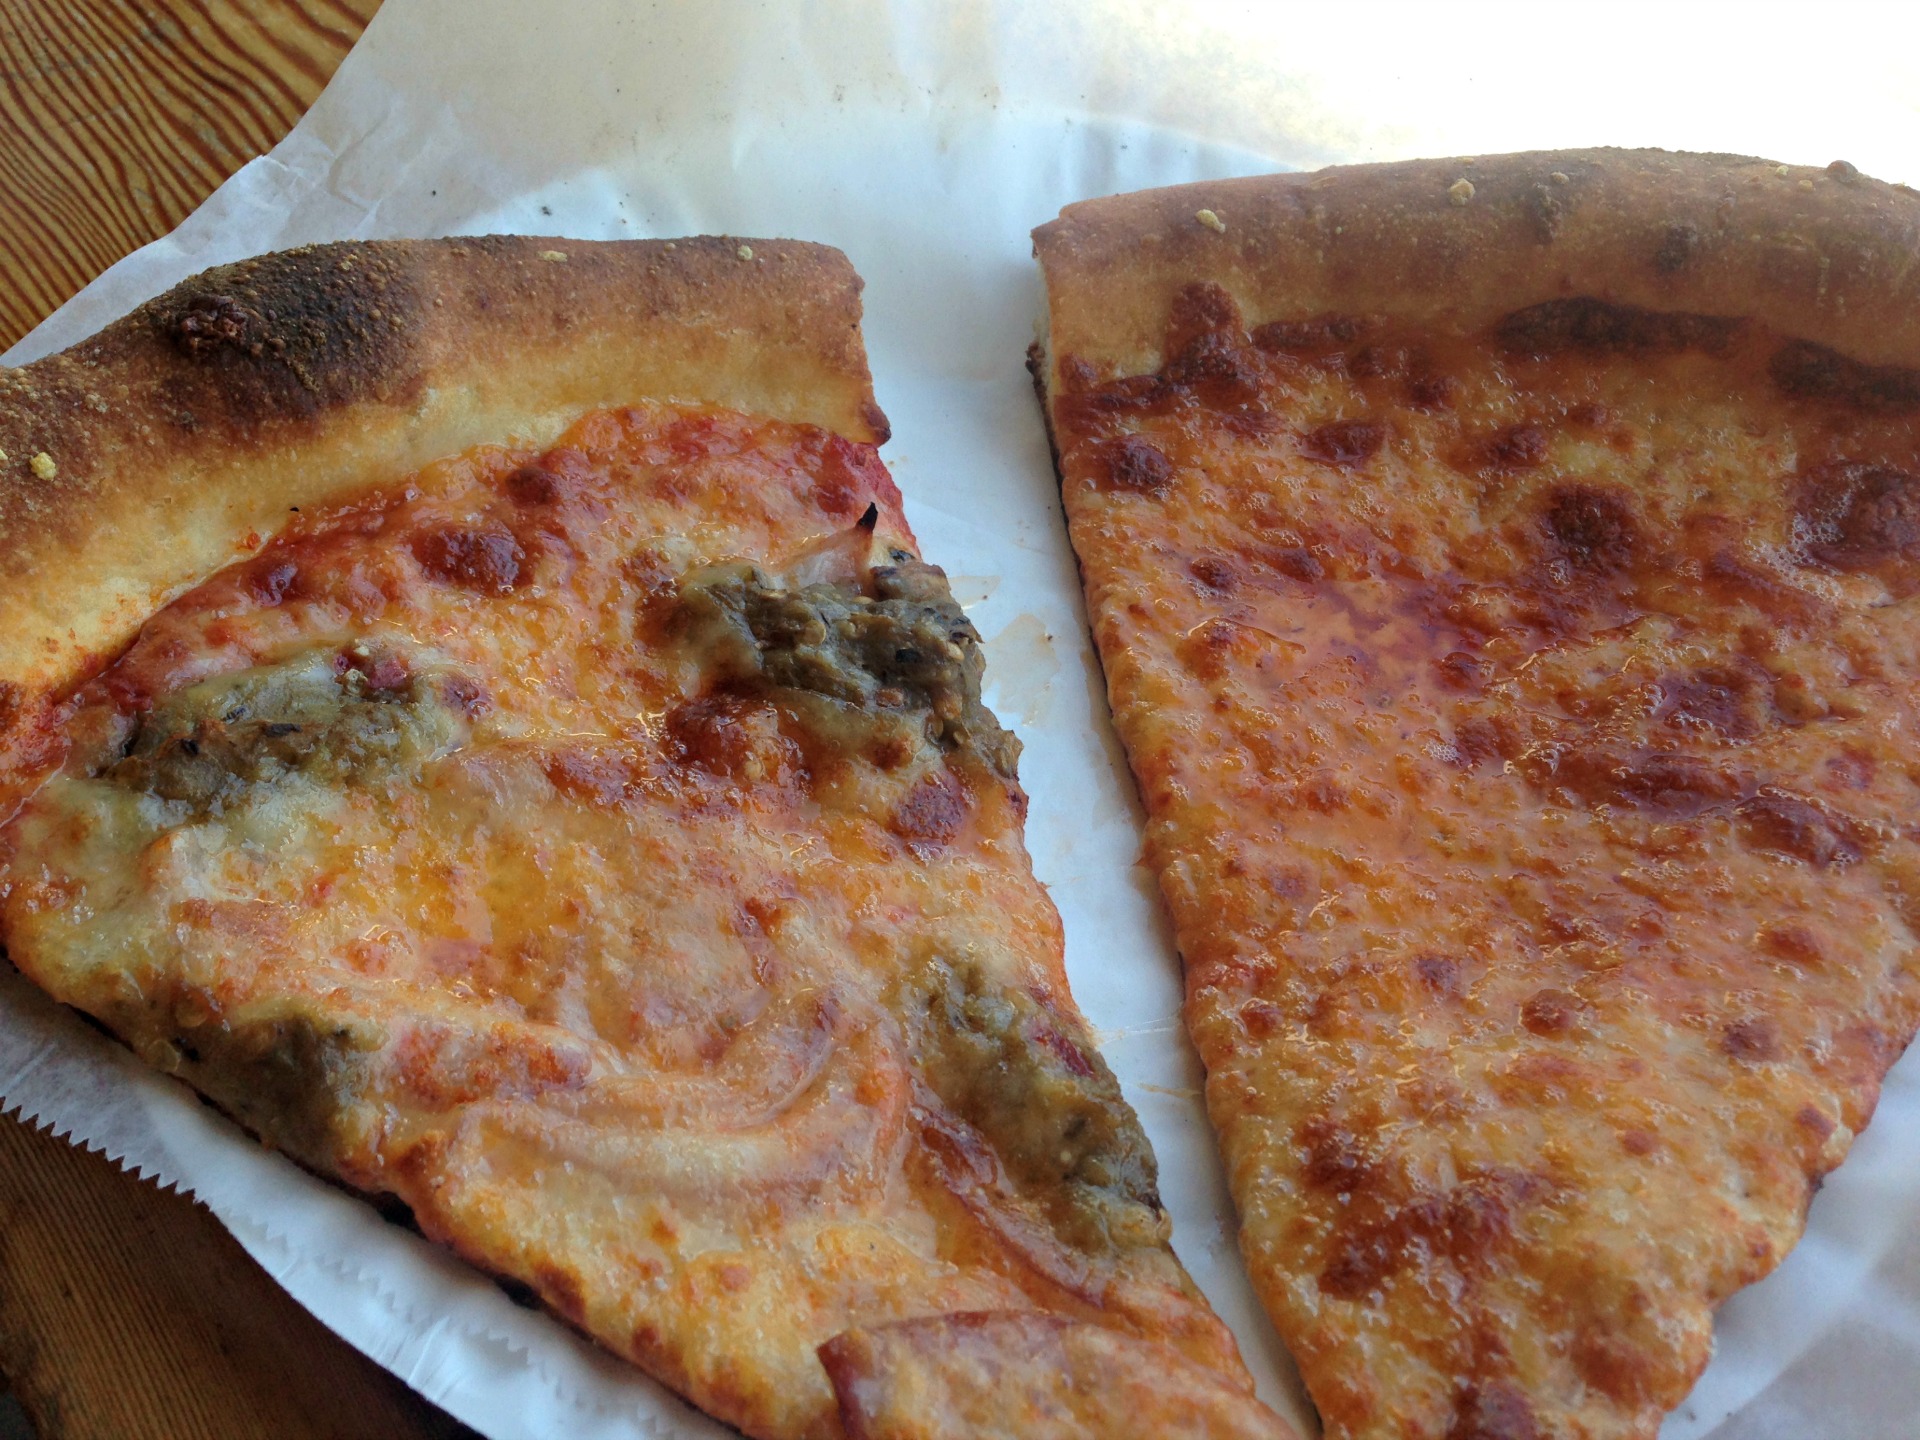 A slice of eggplant and mint and a slice of cheese from Oakland's Slicer.